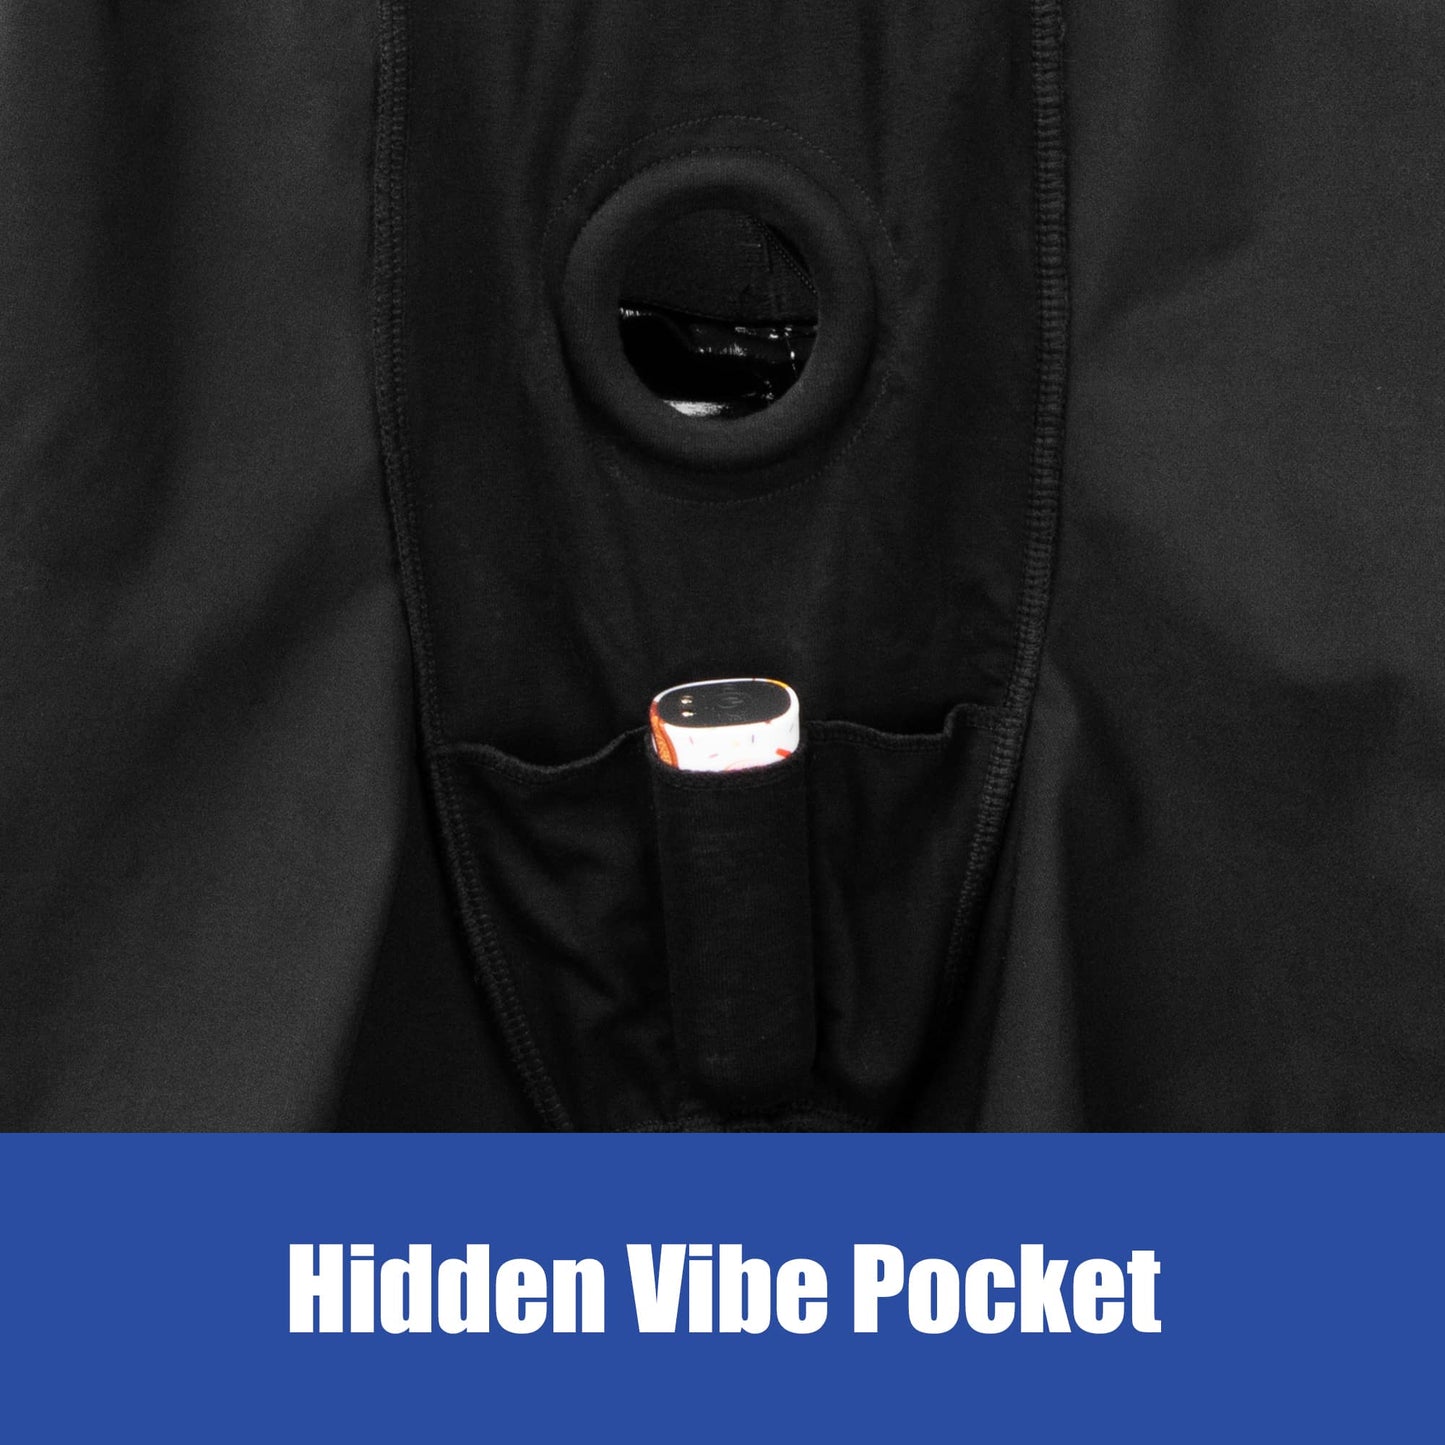 The mini vibrator is put in a hidden pocket at the bottom of the black faux leather strap on shorts